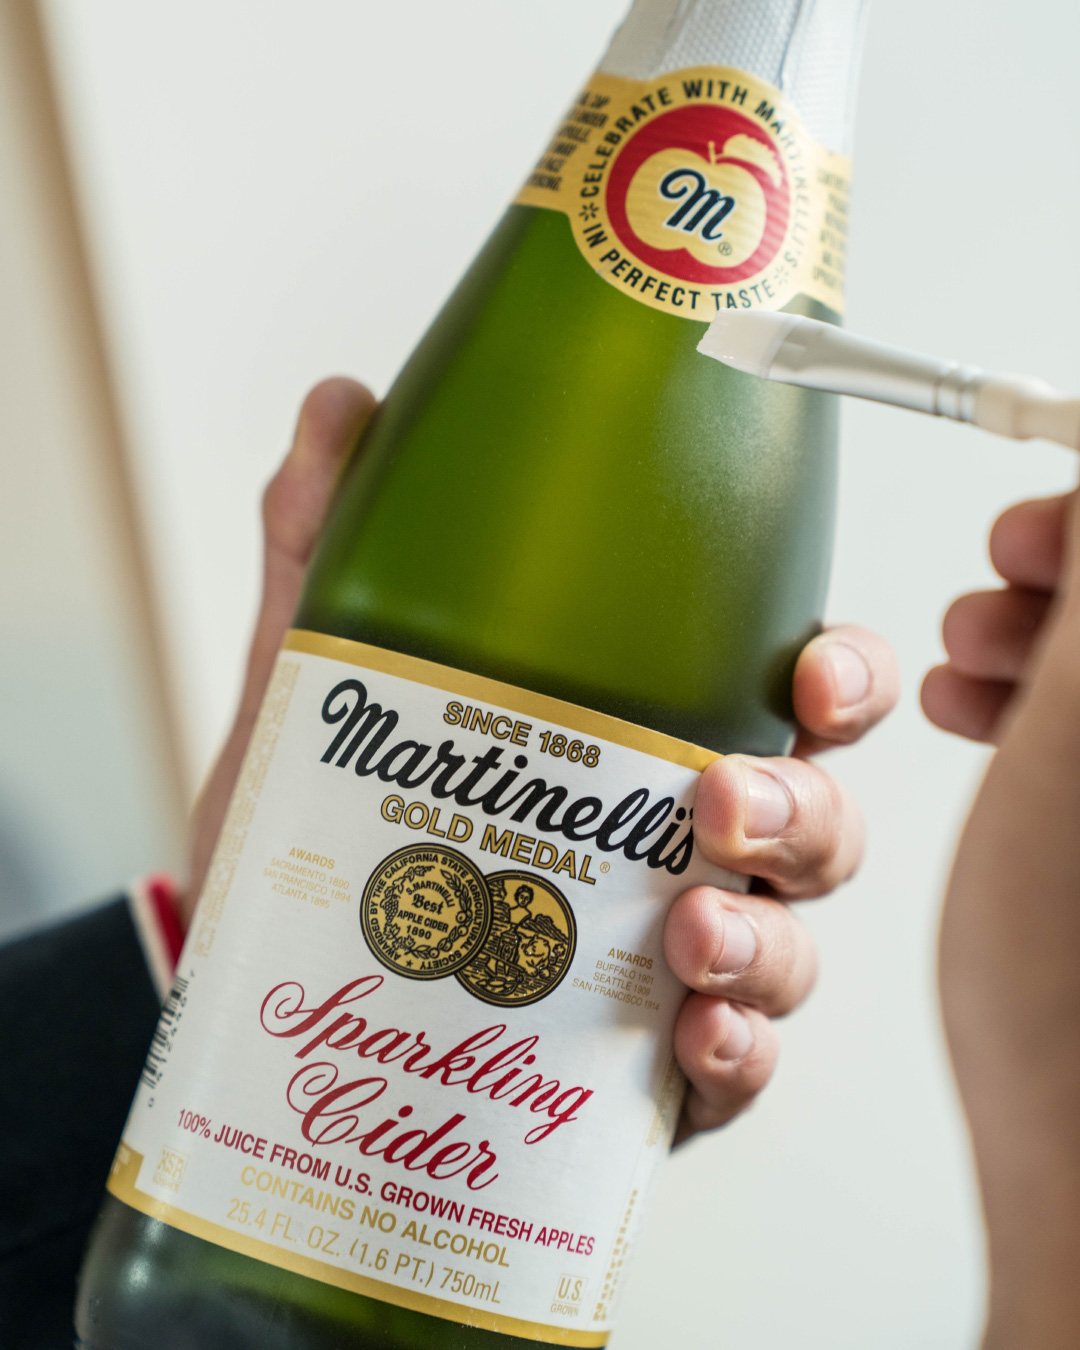 DIY Party Décor or Gift with Sparkling Cider Bottles - S. Martinelli & Co.